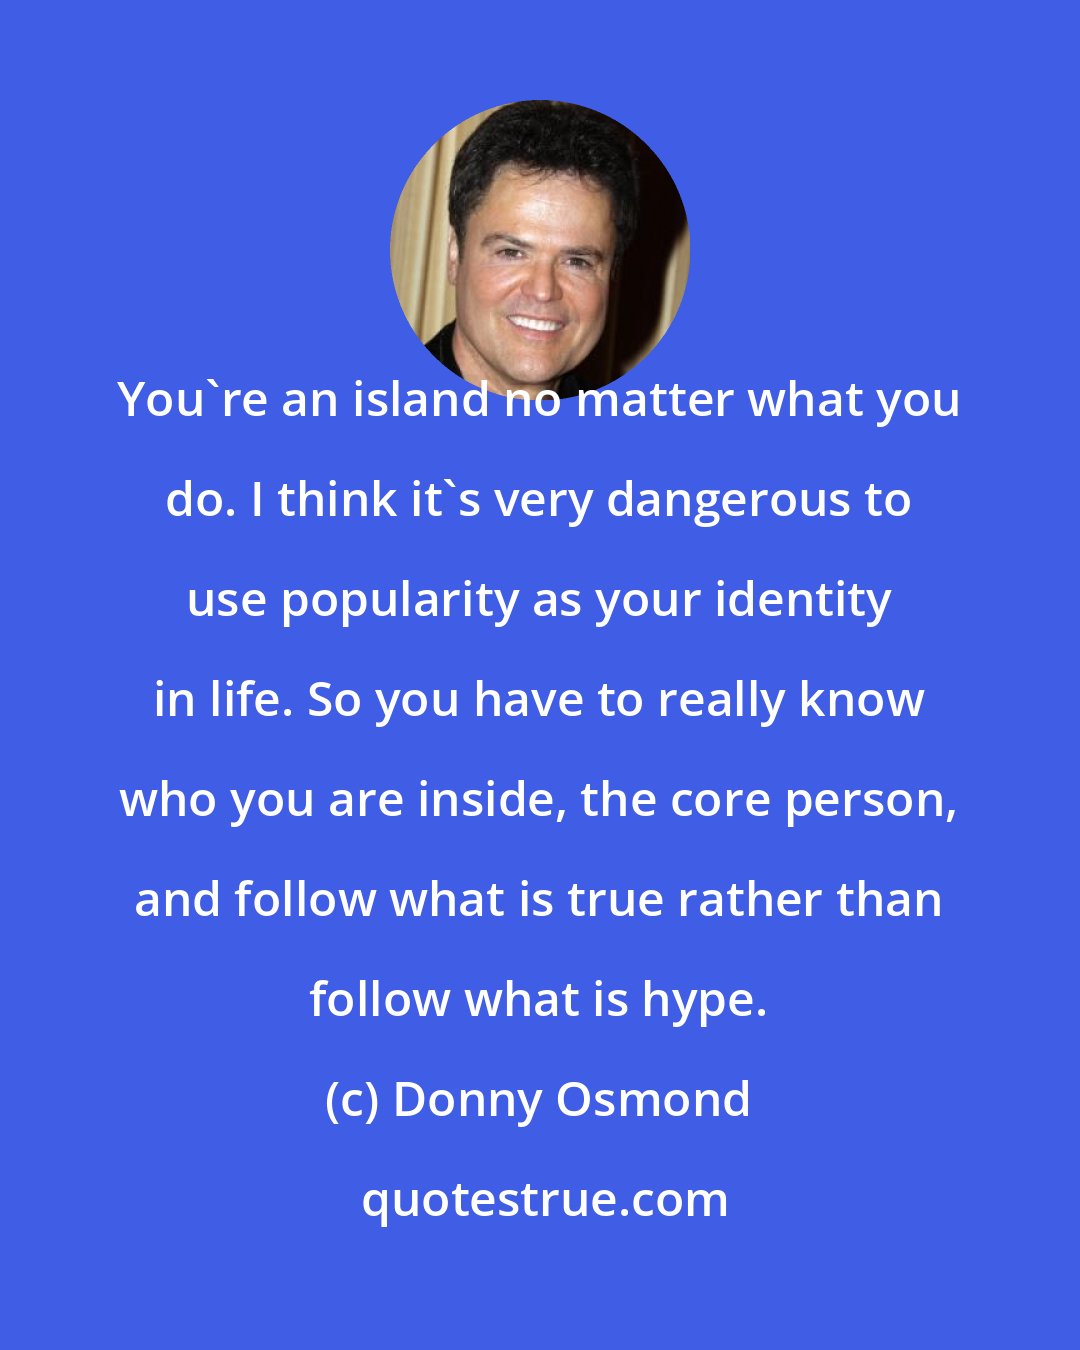 Donny Osmond: You're an island no matter what you do. I think it's very dangerous to use popularity as your identity in life. So you have to really know who you are inside, the core person, and follow what is true rather than follow what is hype.